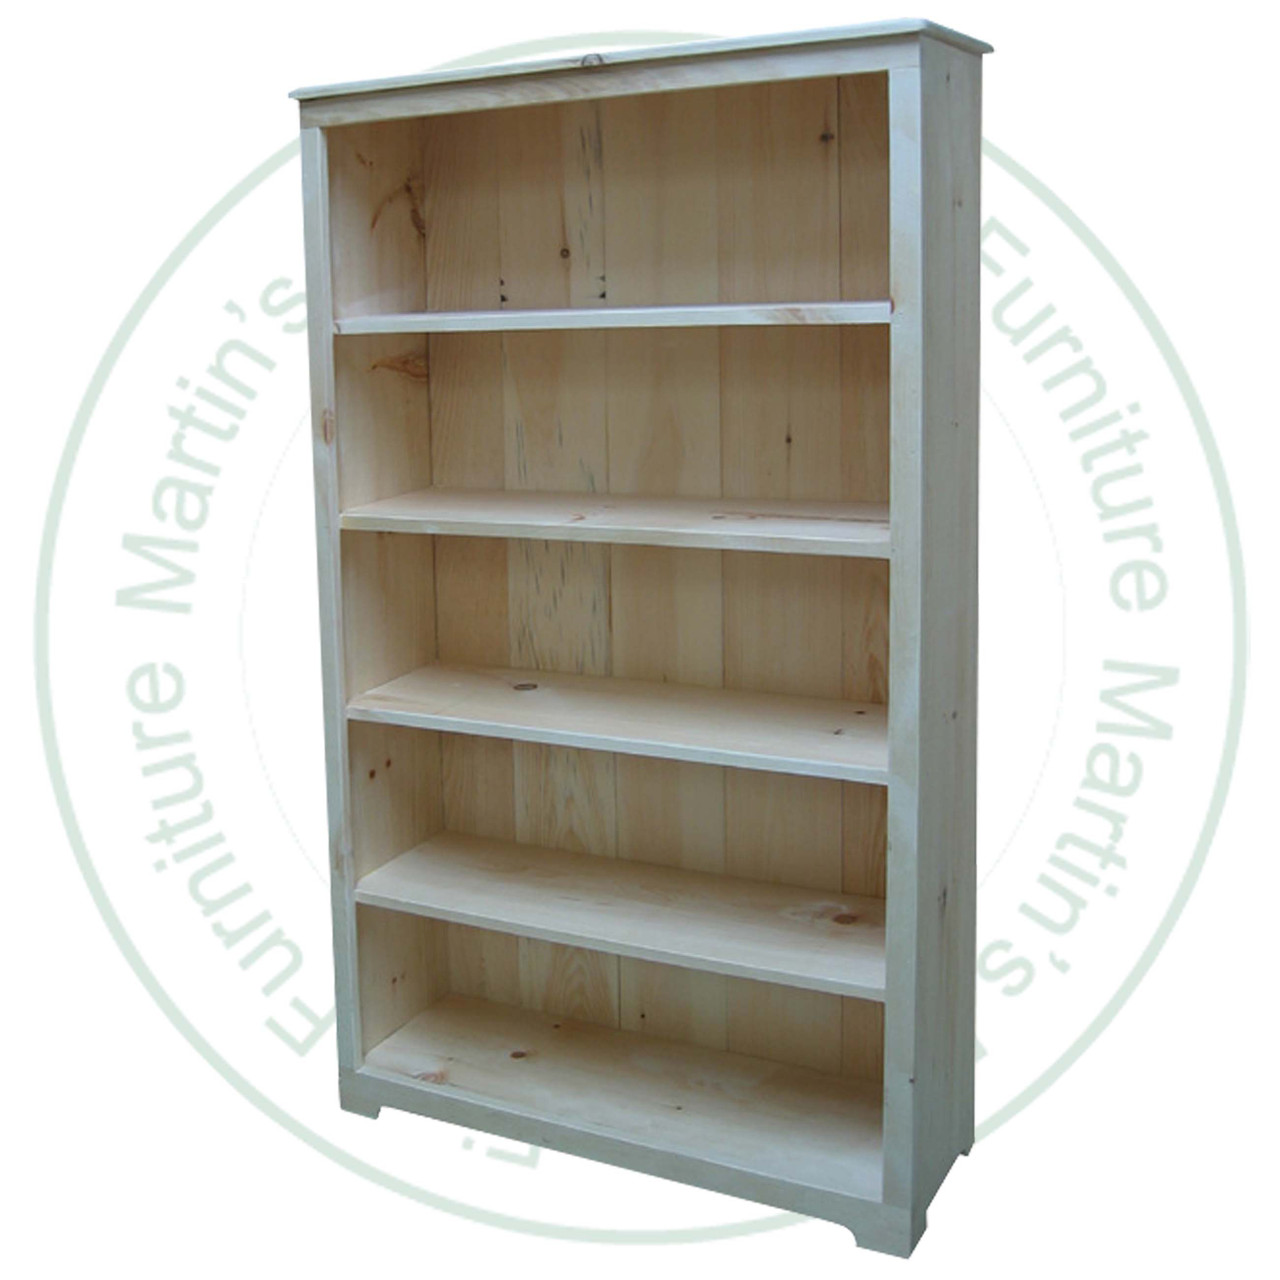 Wormy Maple Nith River Book Case 12''D x 36''W x 60''H